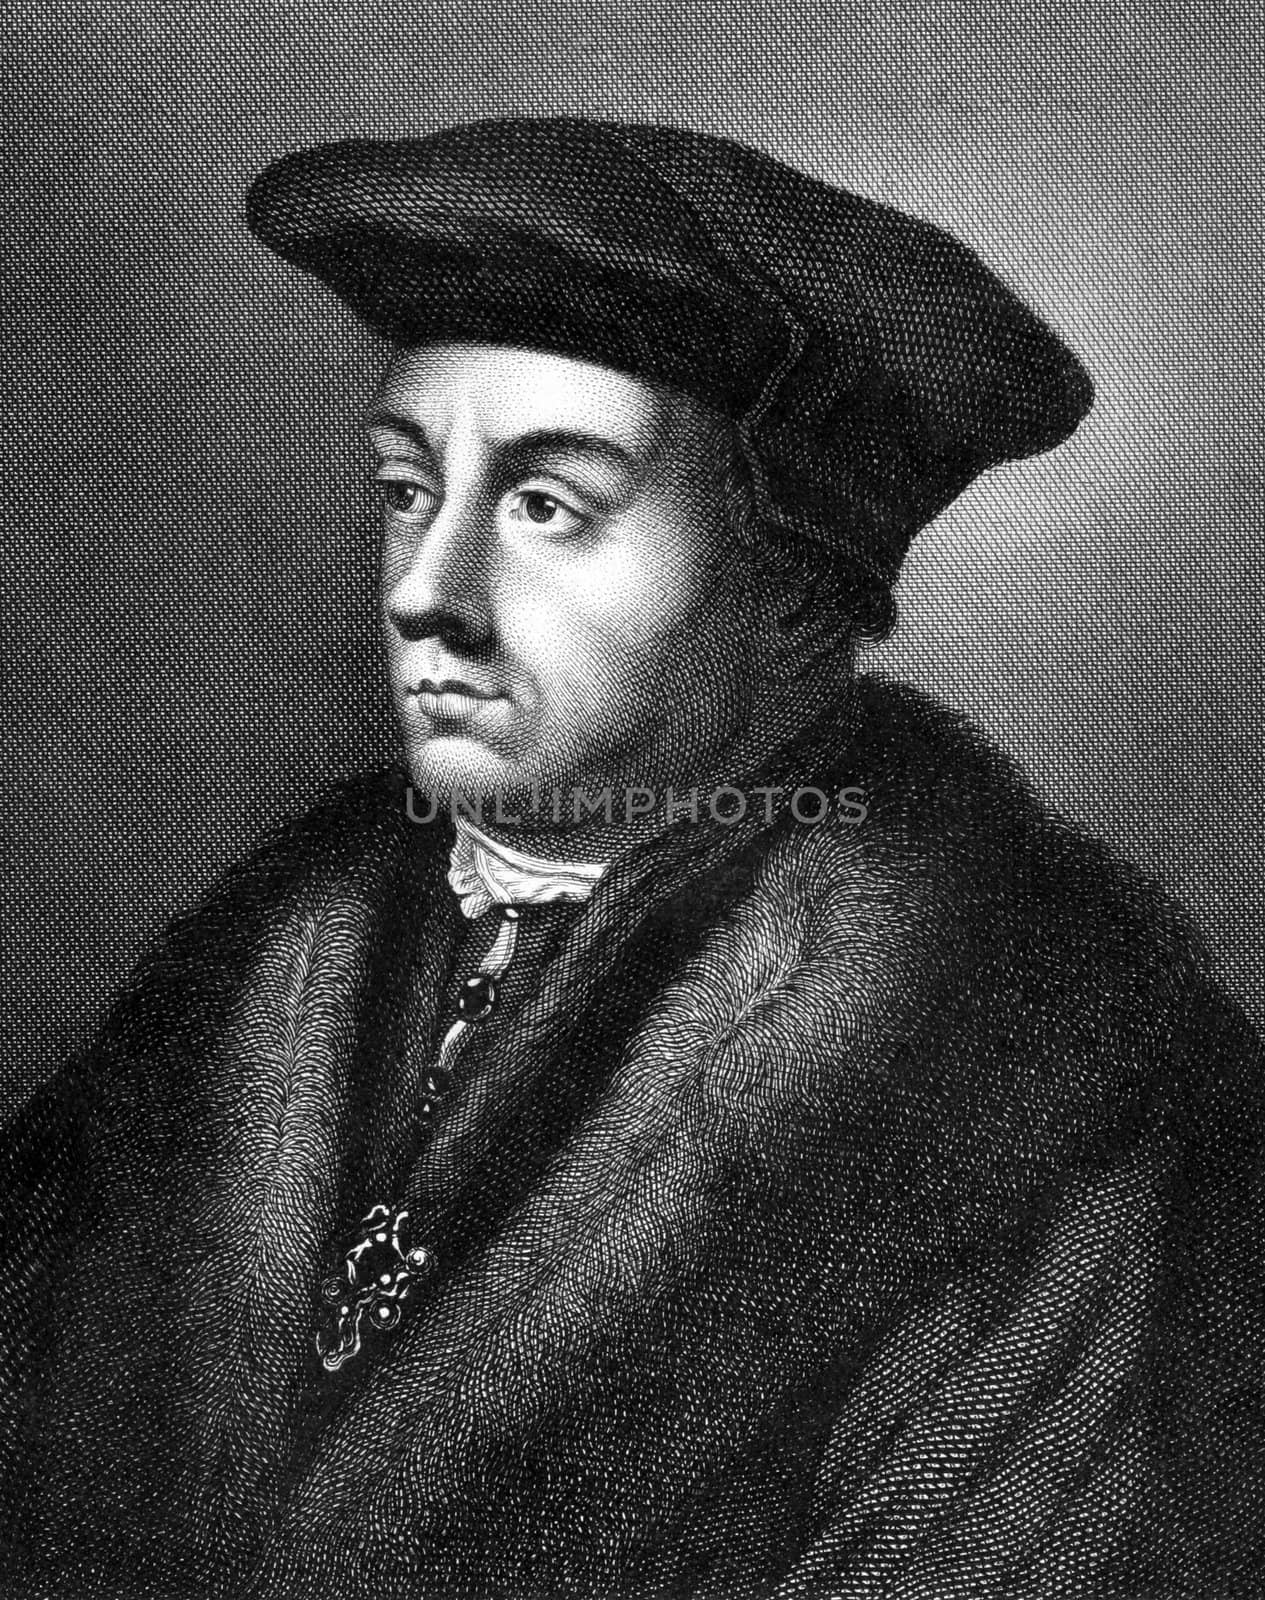 Thomas Cromwell (1485-1540) on engraving from 1859.  English statesman that served as chief minister of King Henry VIII during 1532-1540. Engraved by unknown artist and published in Meyers Konversations-Lexikon, Germany,1859.